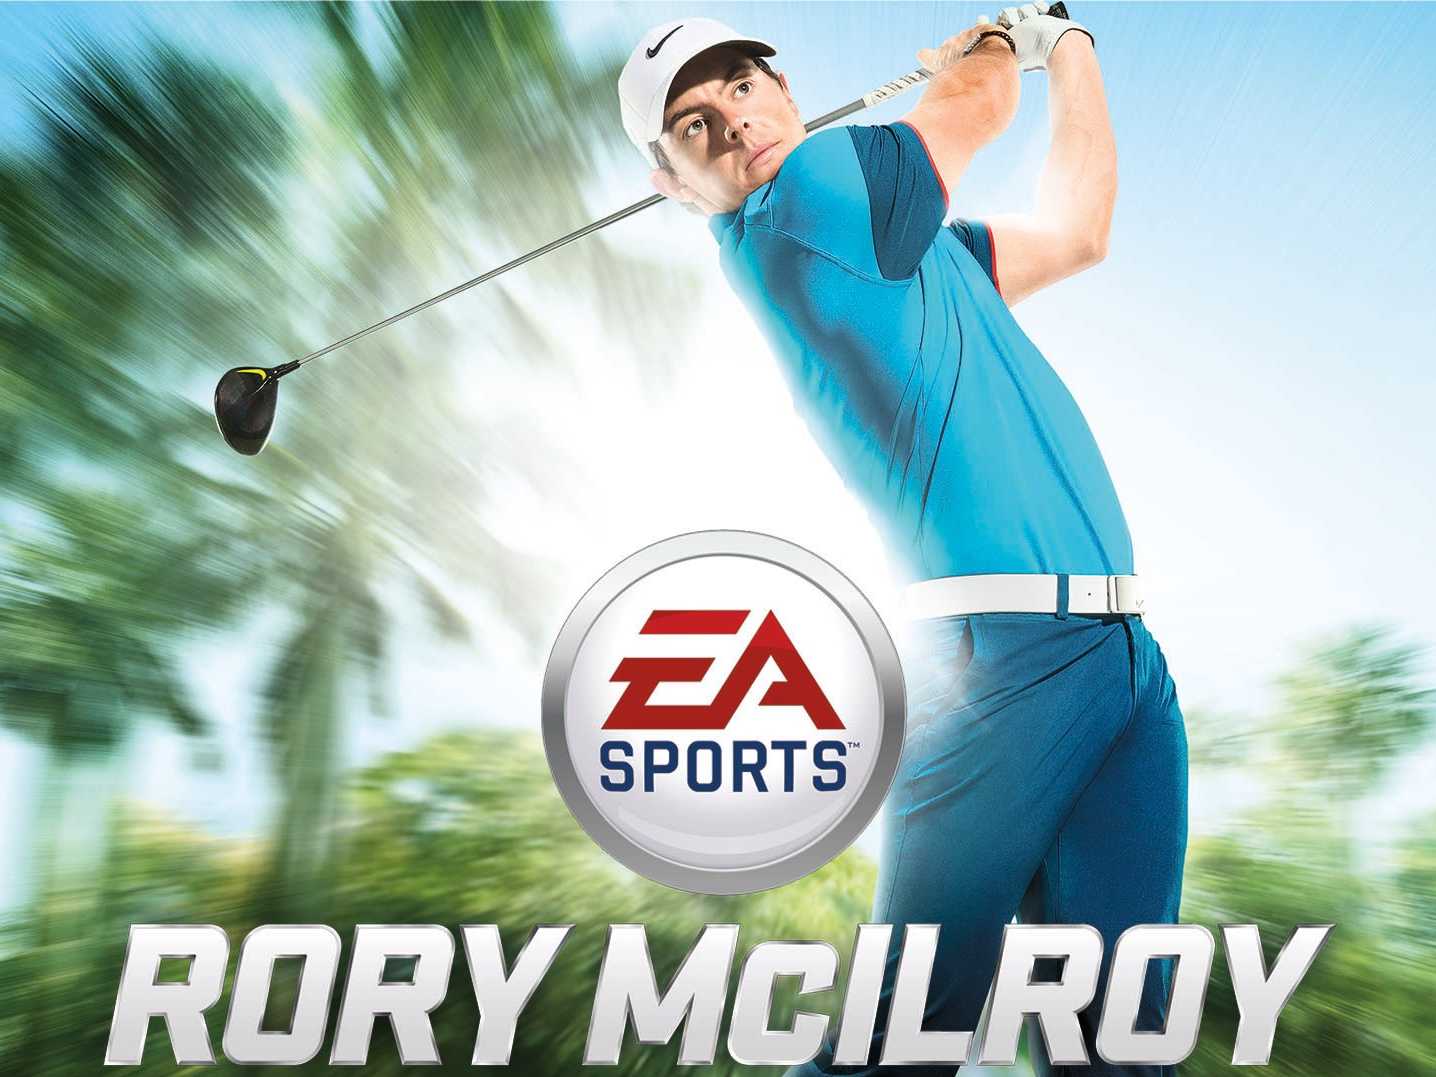 EA Sports replaces Tiger Woods with Rory McIlroy on cover of 'PGA